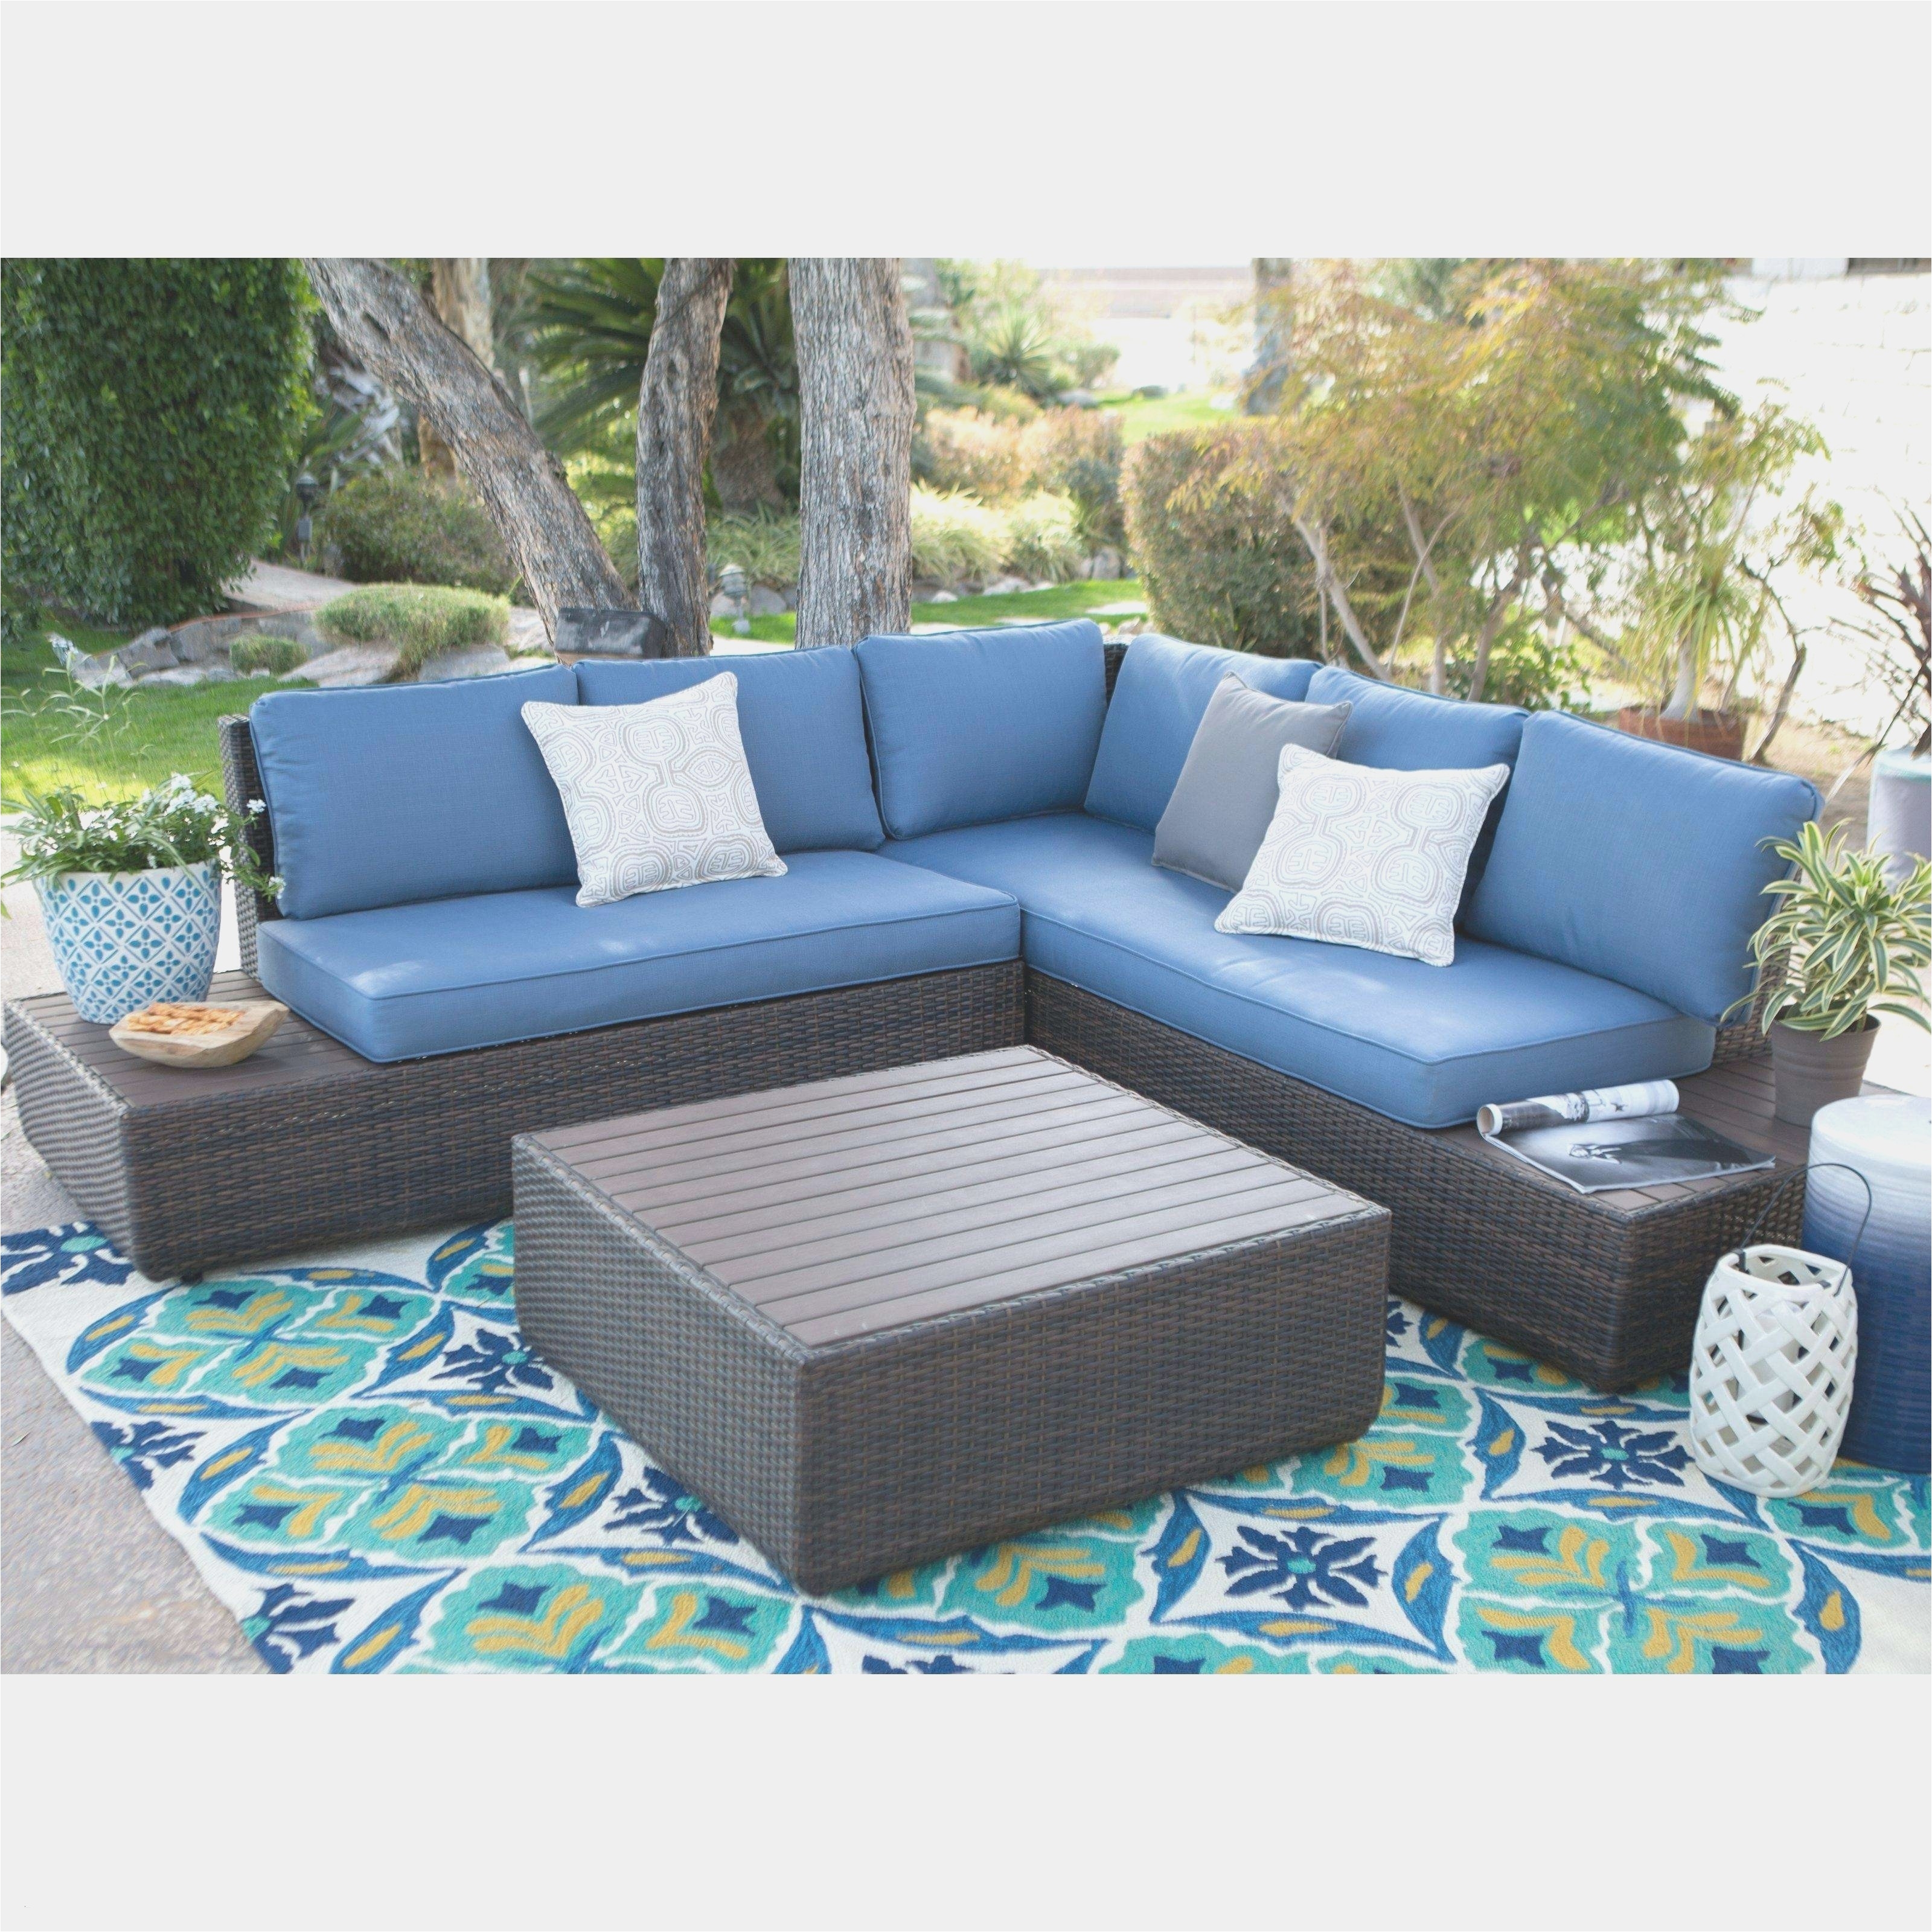 cheap outdoor furniture for sale lovely outdoor sofa 0d patio chairs sale replacement cushions ideas beautiful